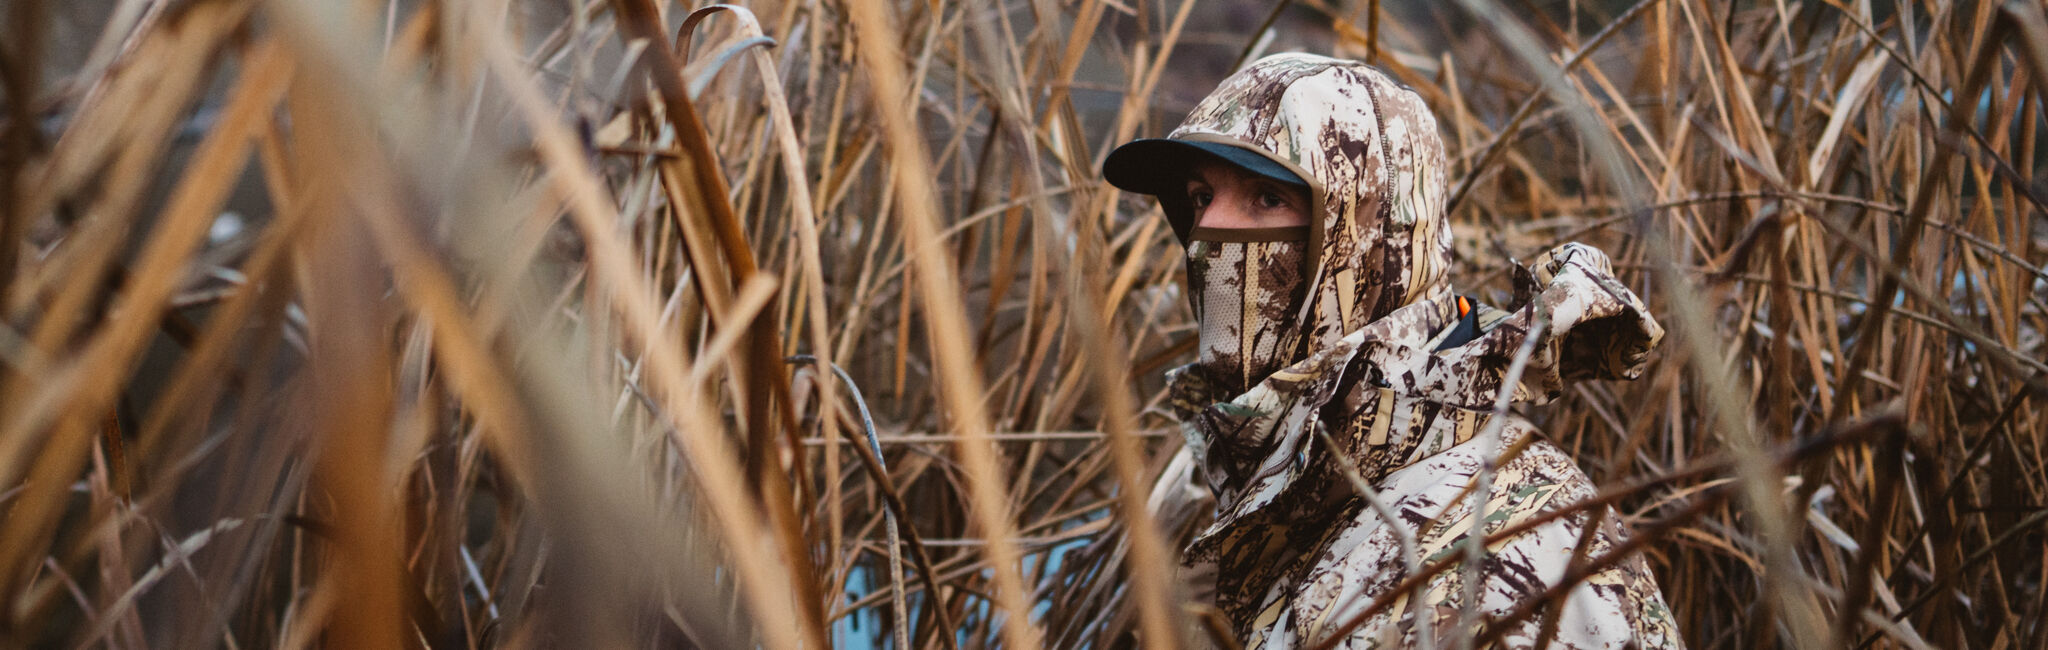 Up To 30% Off Waterfowl Hunting Gear